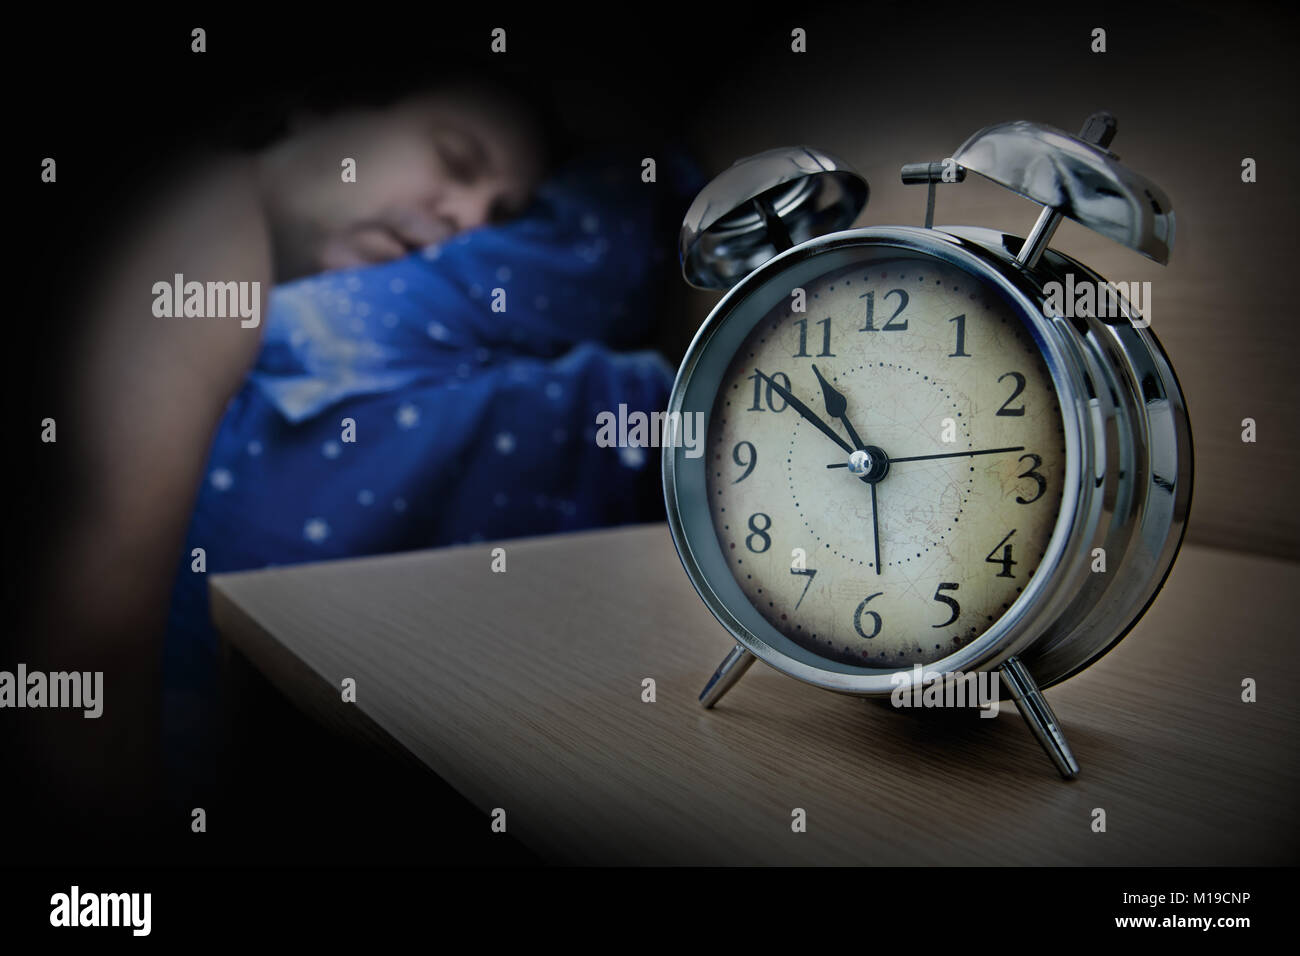 a man sleeping on the bed beside the alarm clock on table, in night. Stock Photo